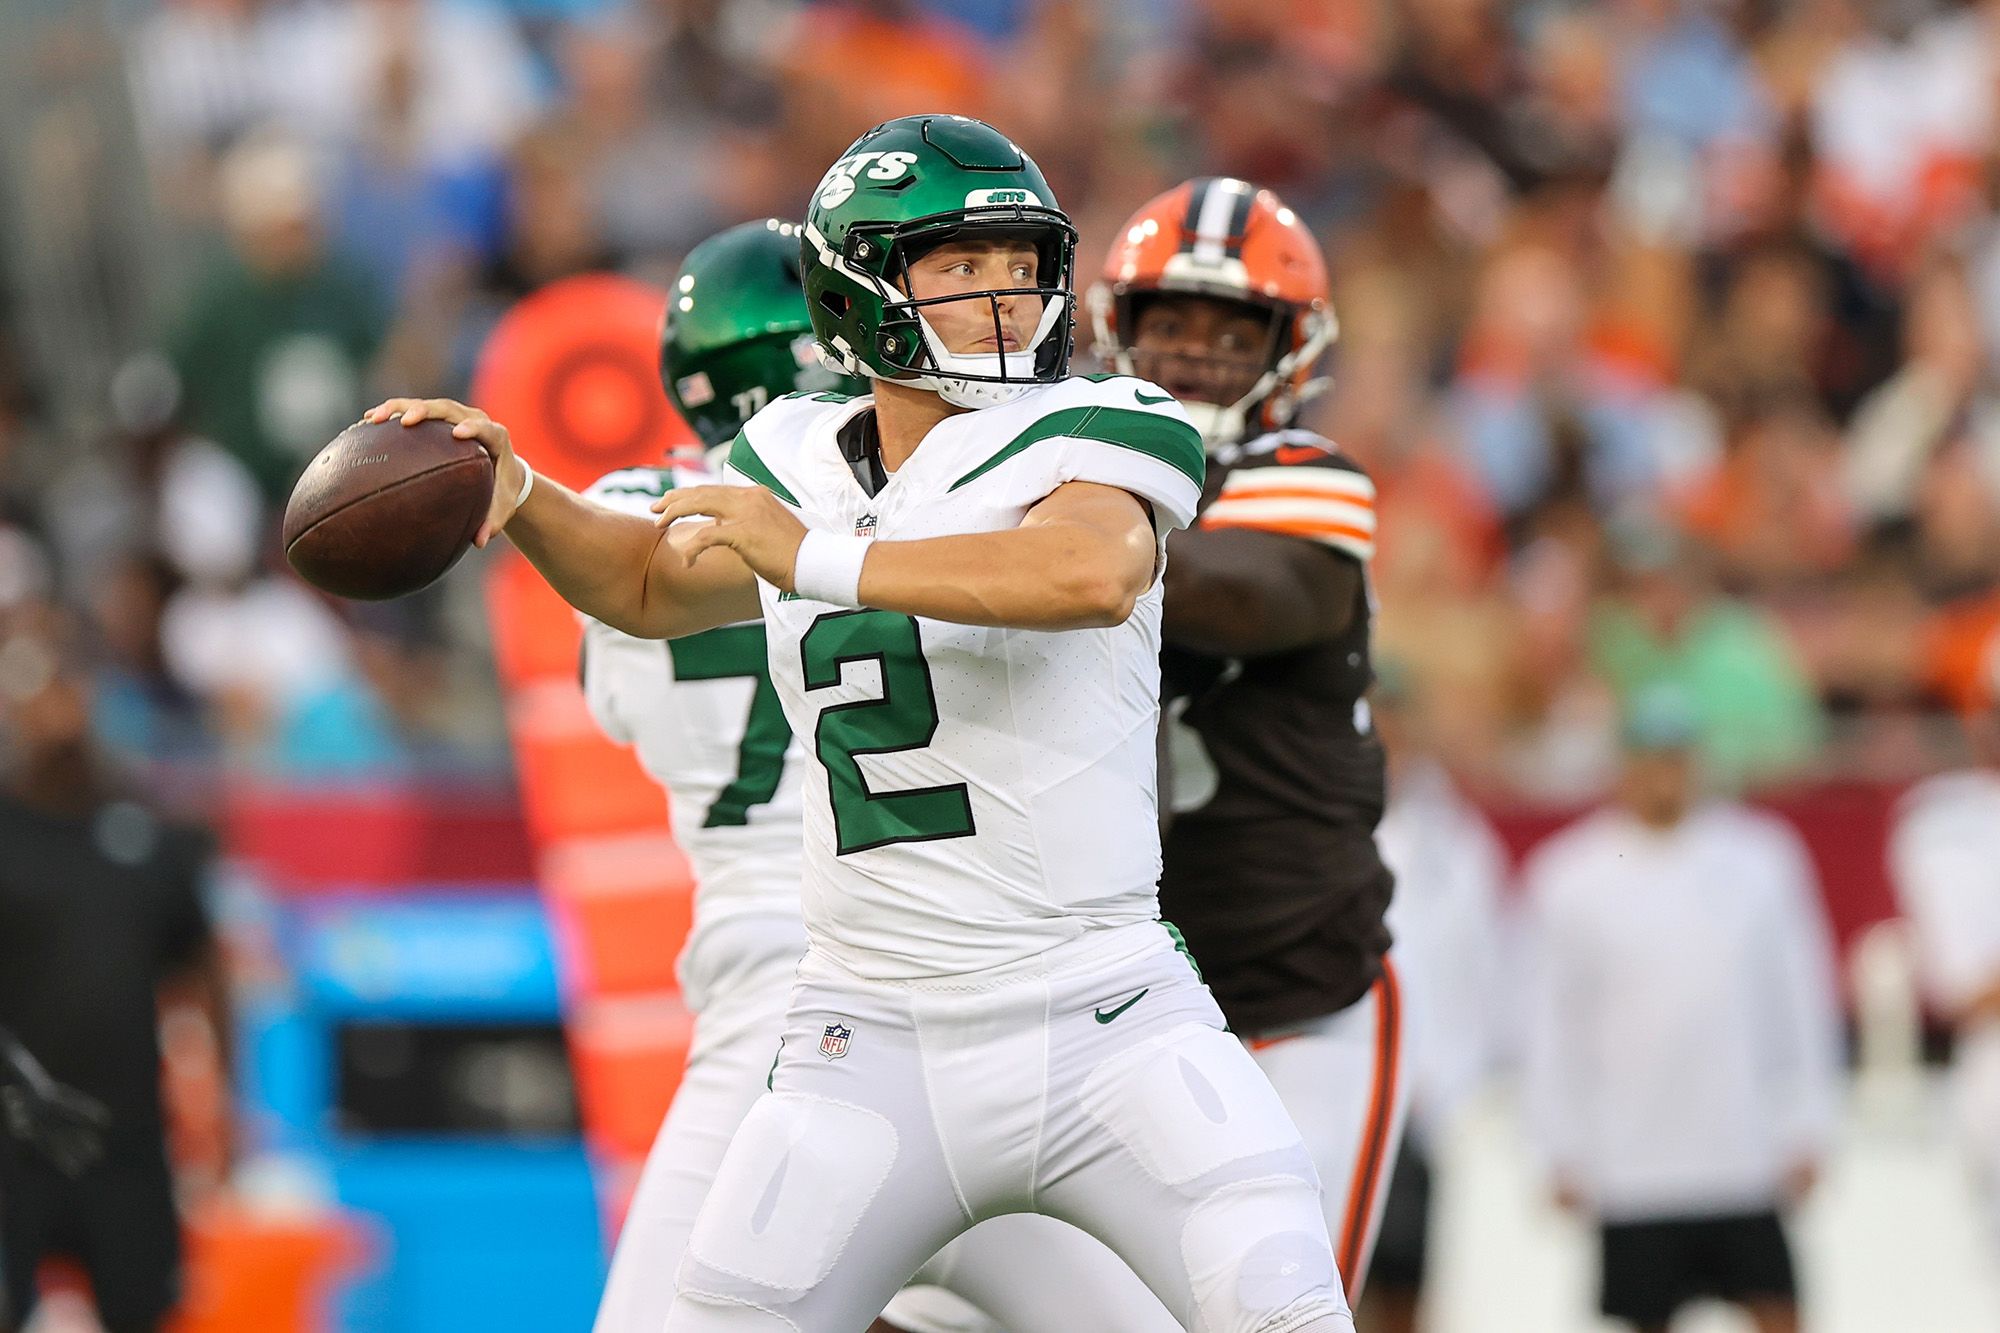 Jets lose 21-16 to Browns in Hall of Fame game